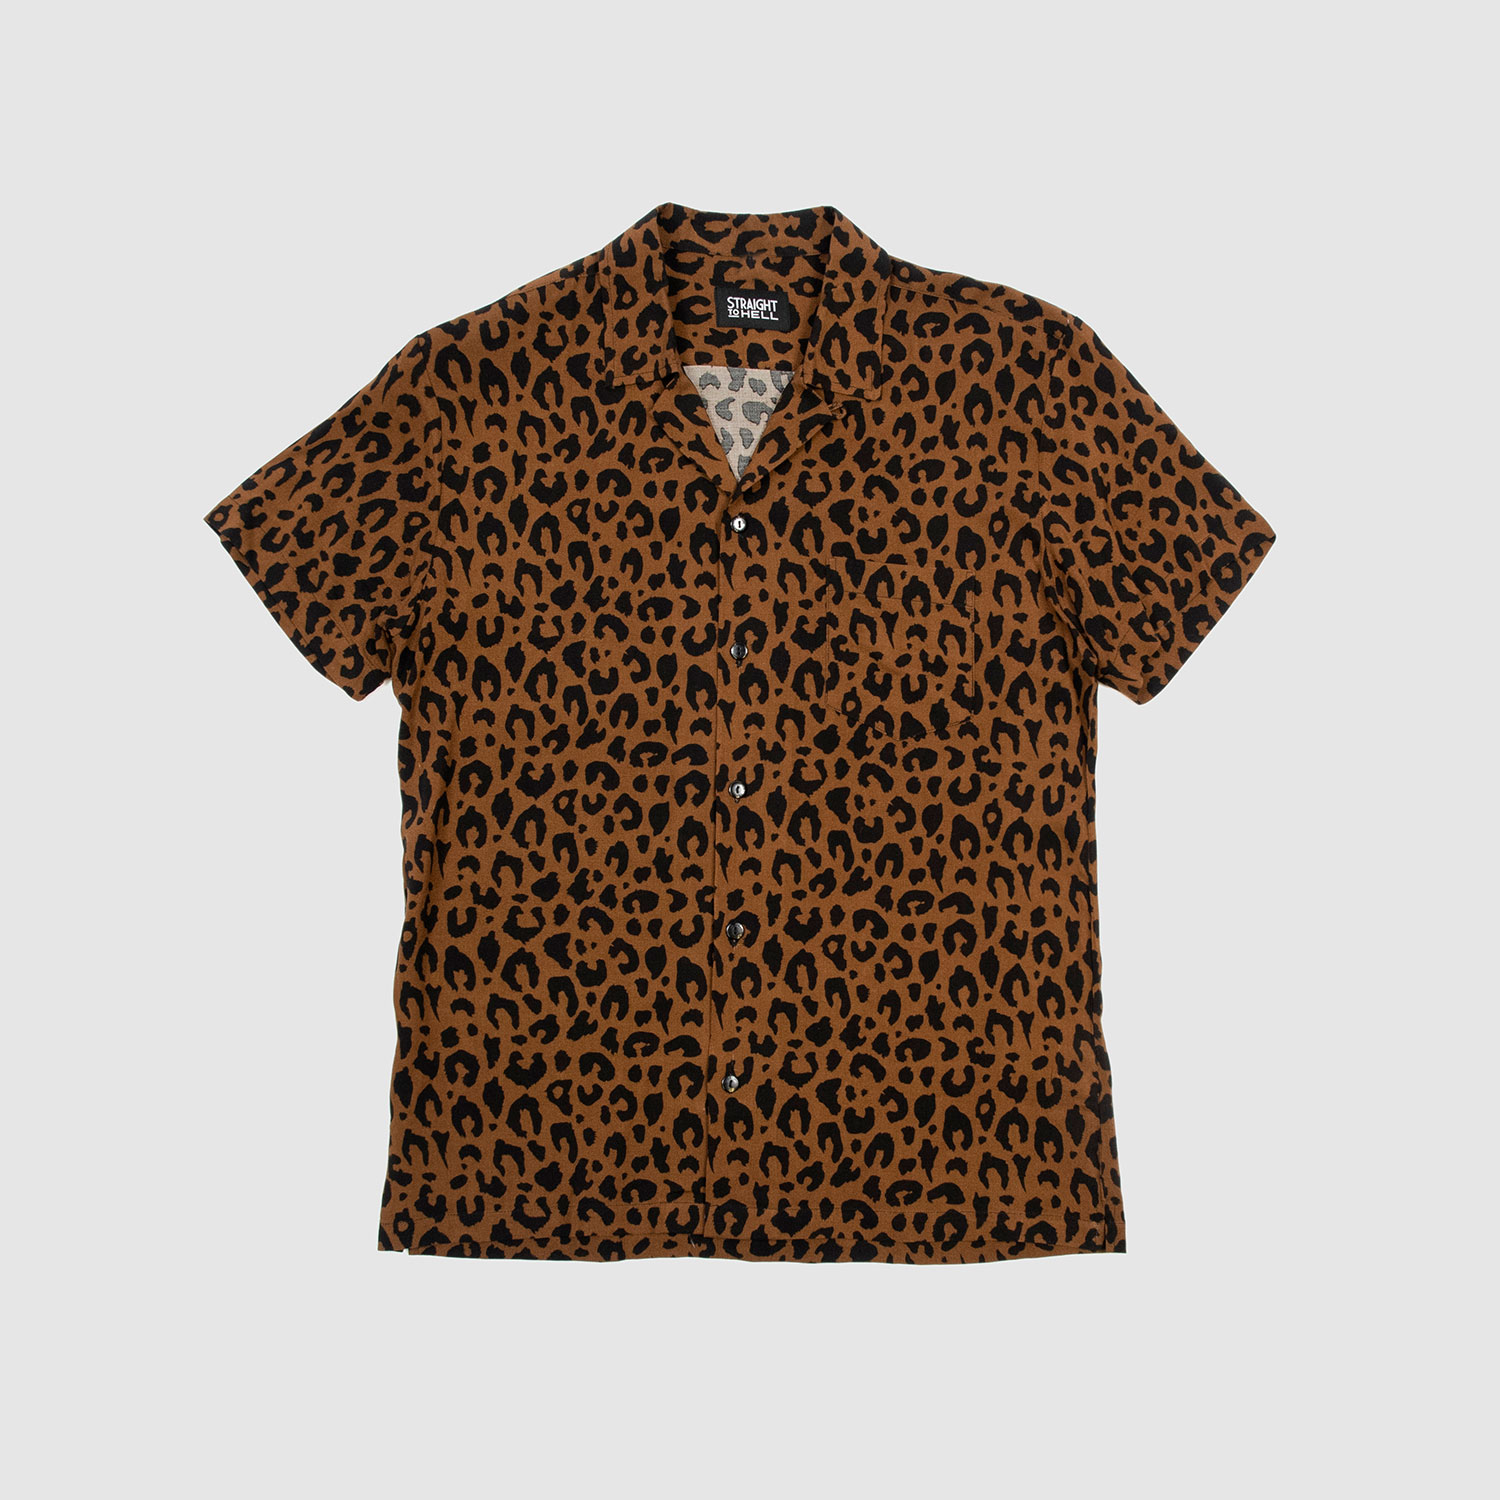 Boss Leopard - Brown and Black | Straight To Hell Apparel